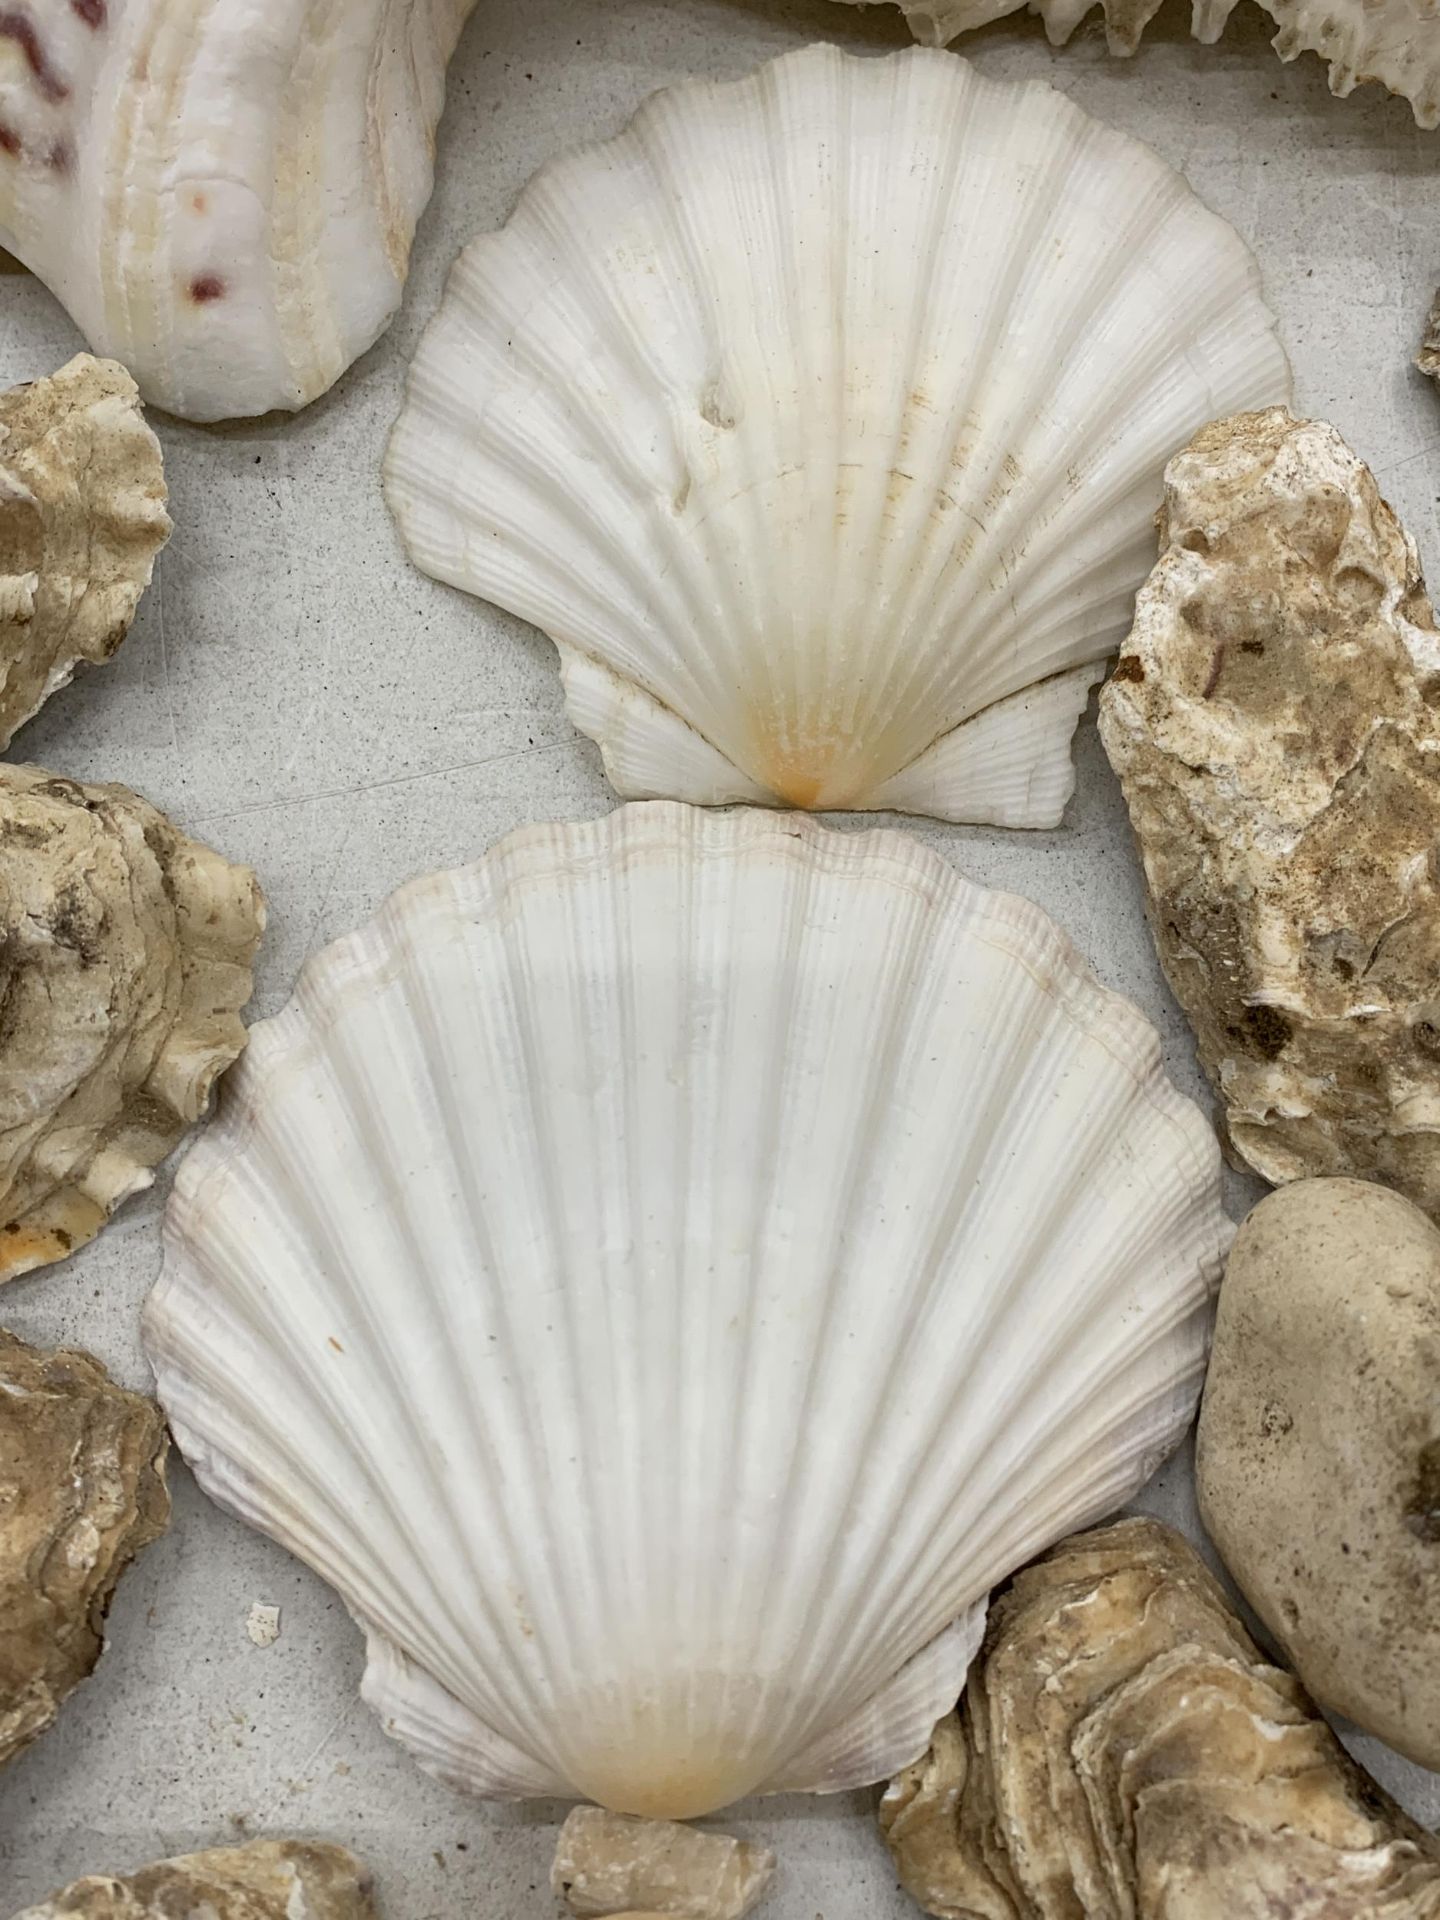 A COLLECTION OF SHELLS AND PEBBLES TO INCLUDE WHITE SCALLOPS, LARGE CONCH, OYSTER SHELLS, ETC., - Image 5 of 5